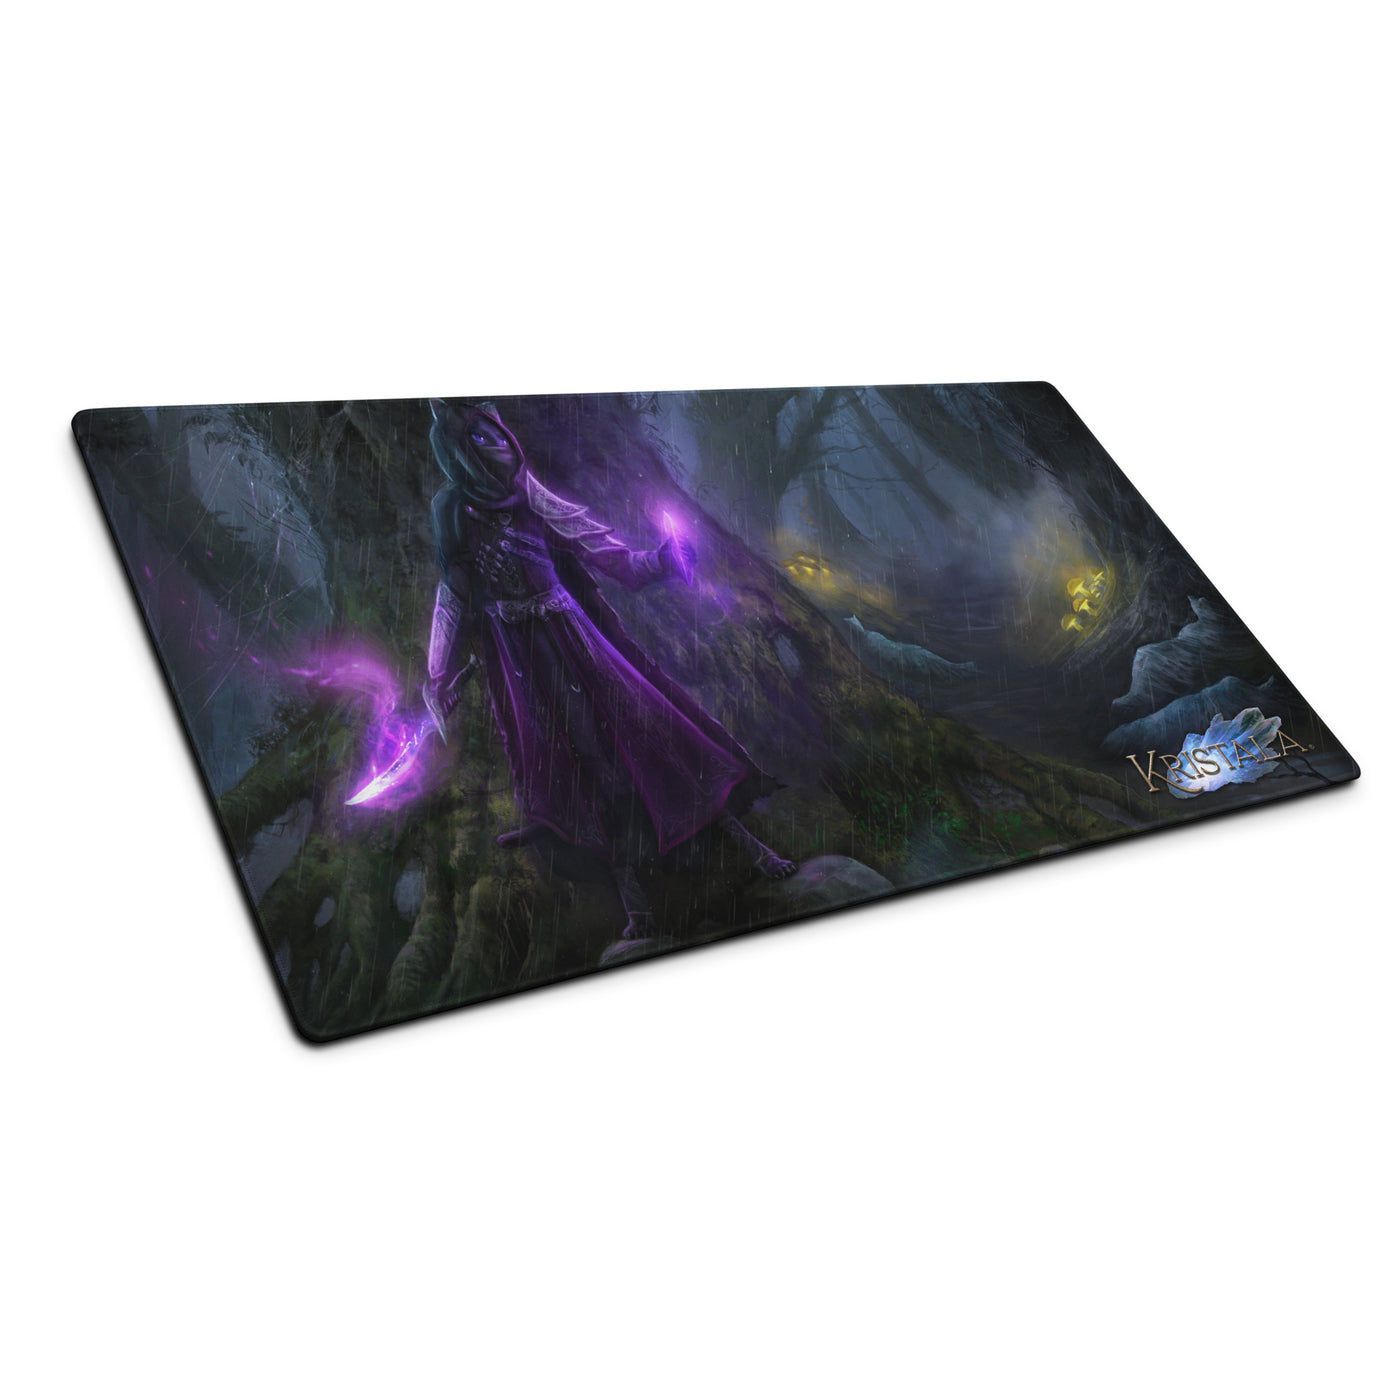 tilted front view of large, no-slip gaming mouse pad with kristala game dark fantasy illustration levida's quest graphic black mousepad base white background